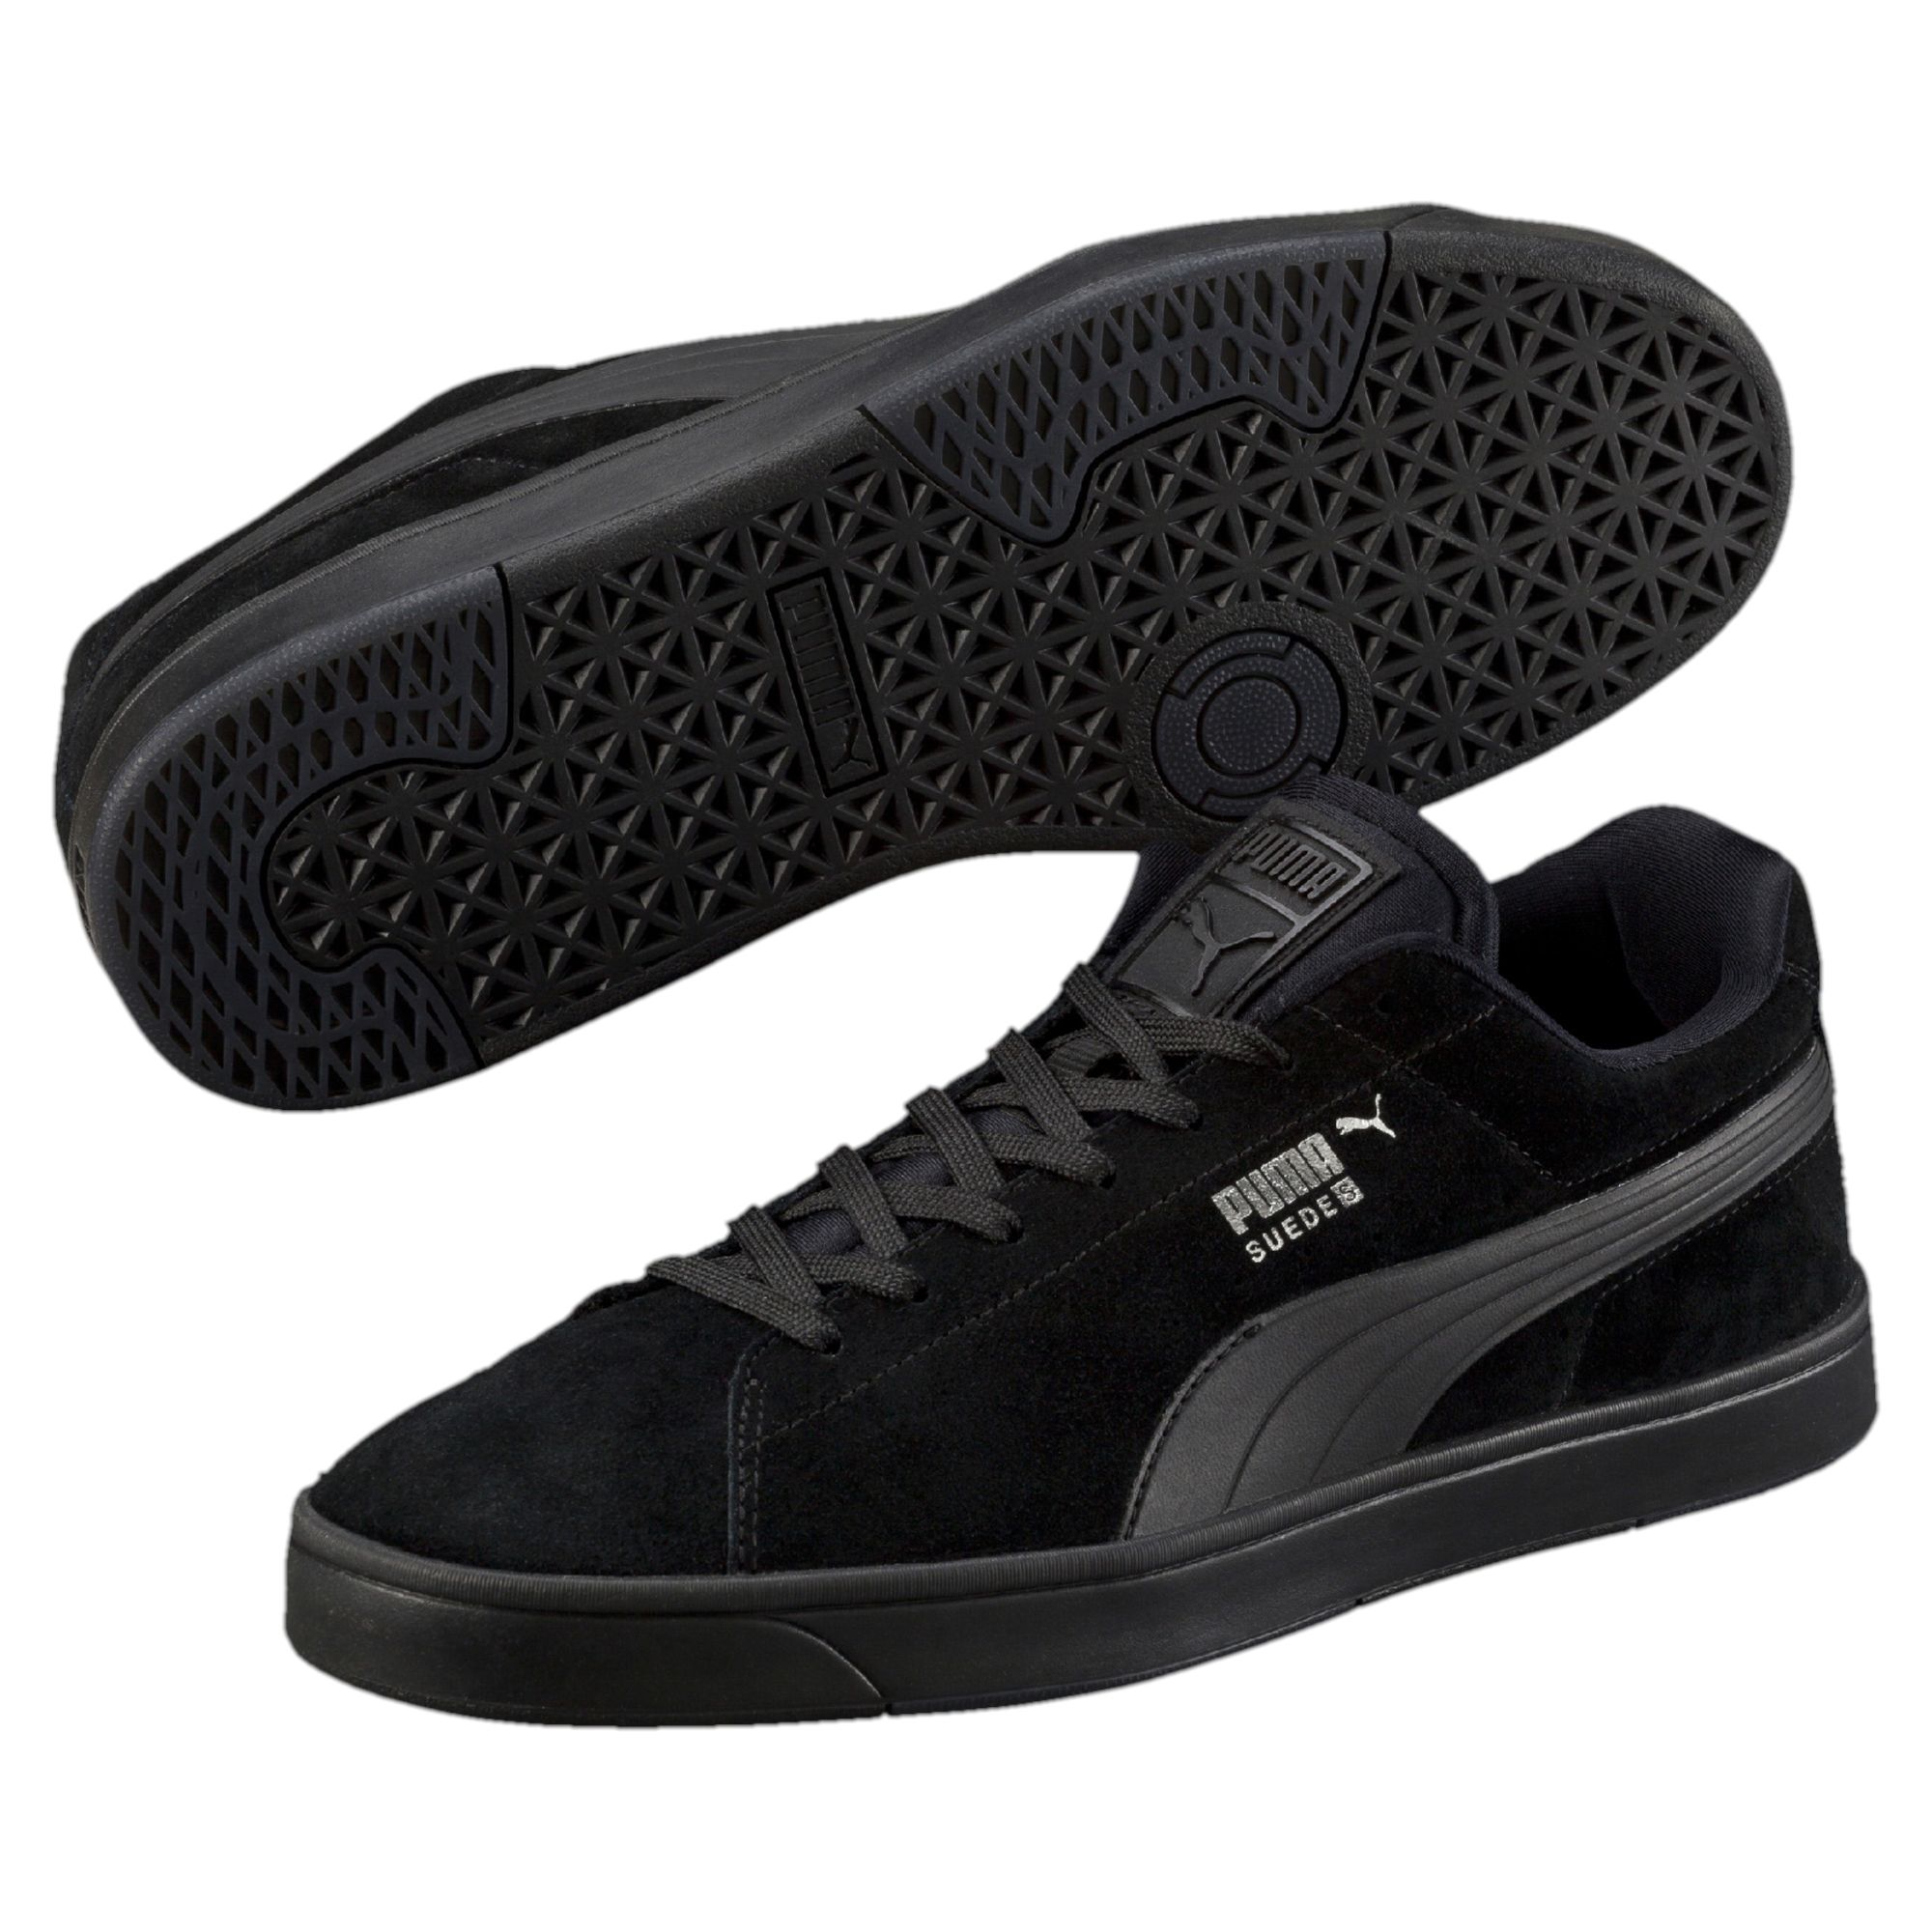 PUMA Suede S Trainers Low Boot Male New